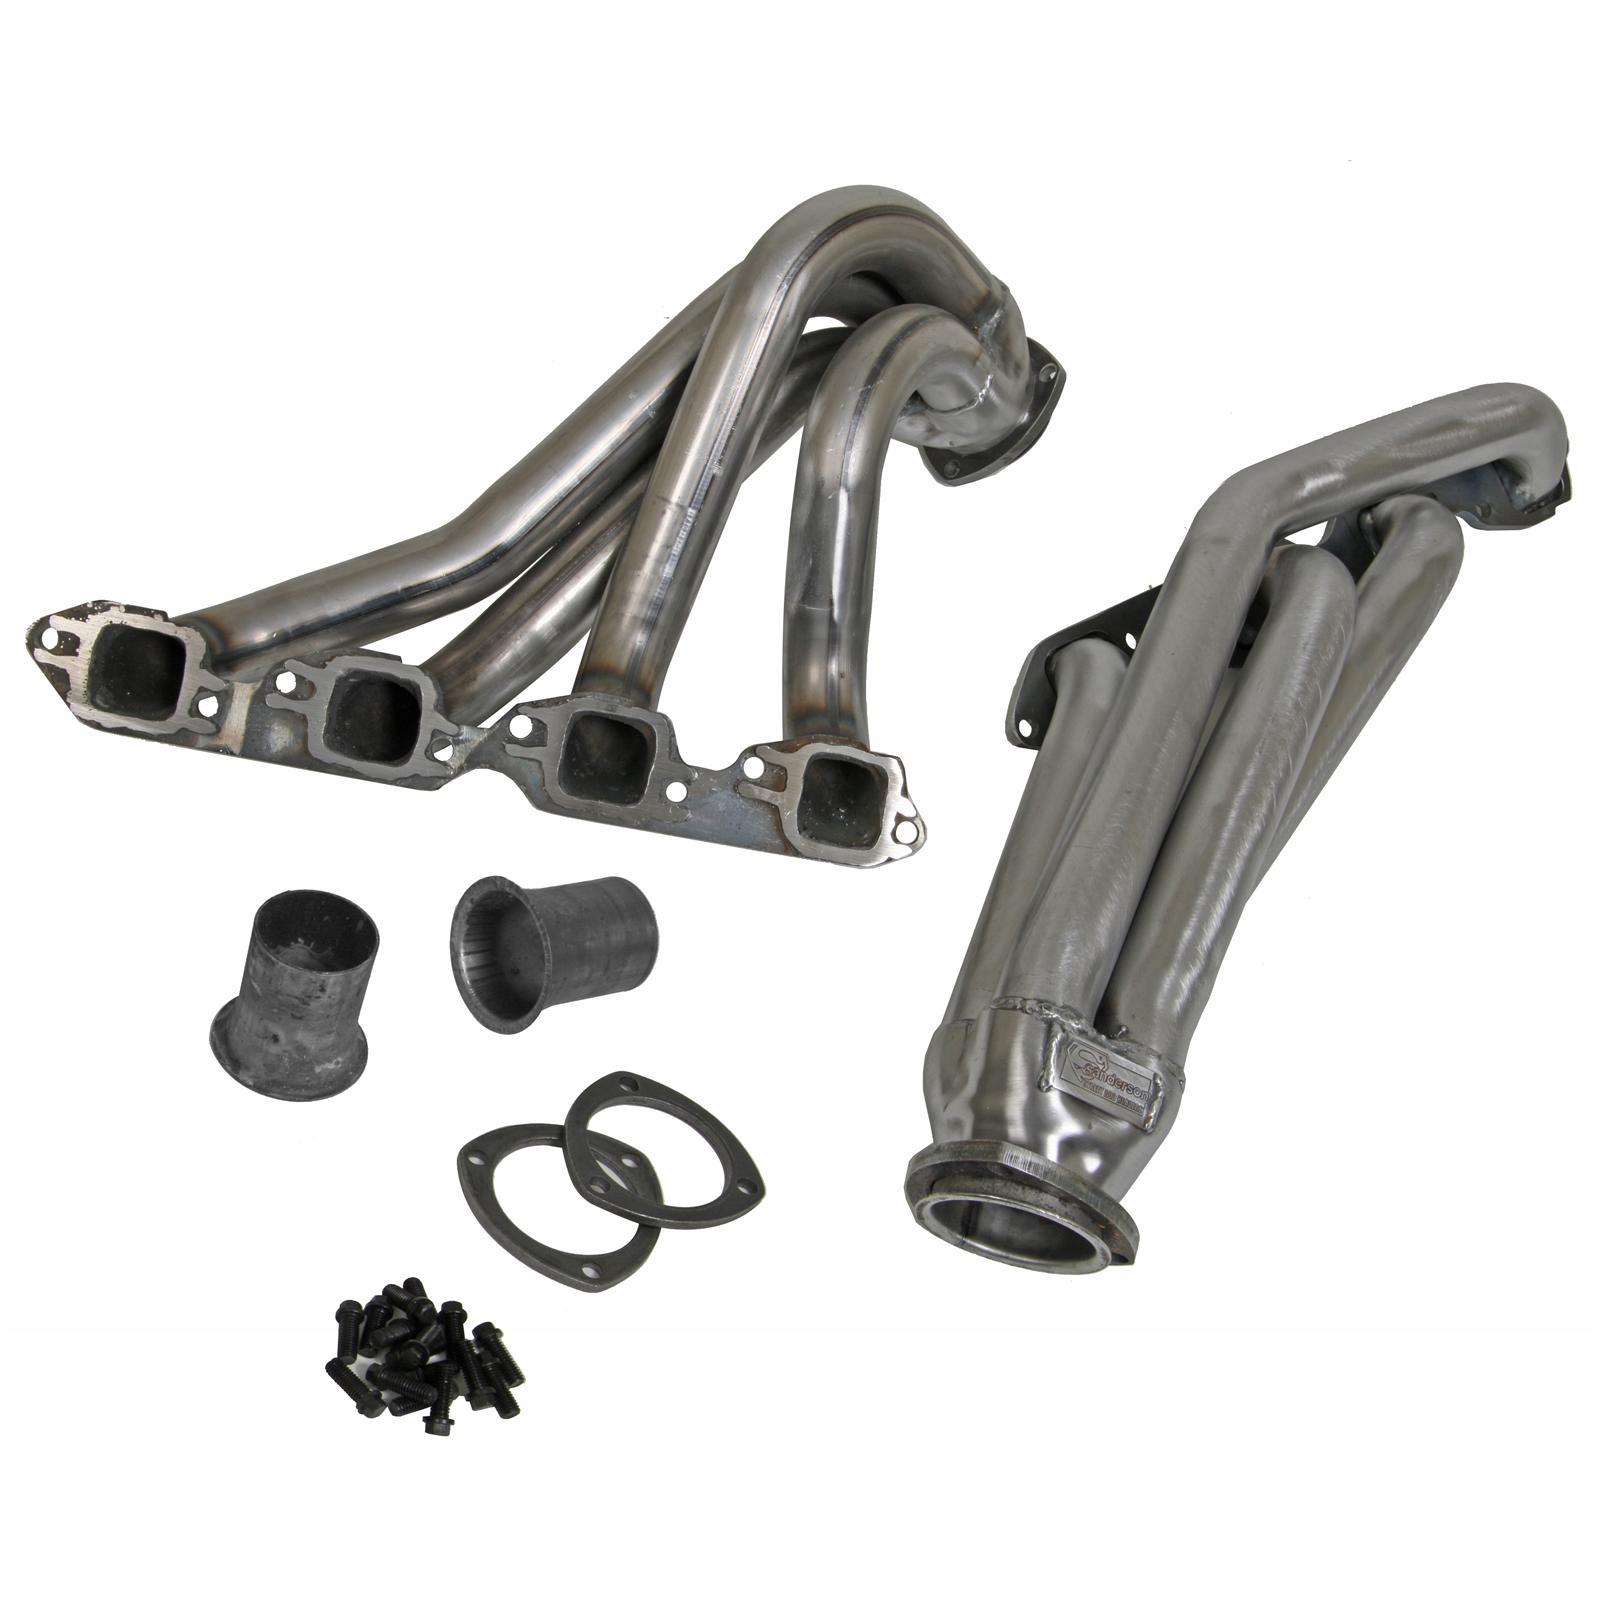 Sanderson Headers CC13-P Headers, Mid-Length, 1-1/2 in Primary, 2-1/2 in Collector, Steel, Natural, Small Block Chevy, GM H-Body 1971-81, Pair